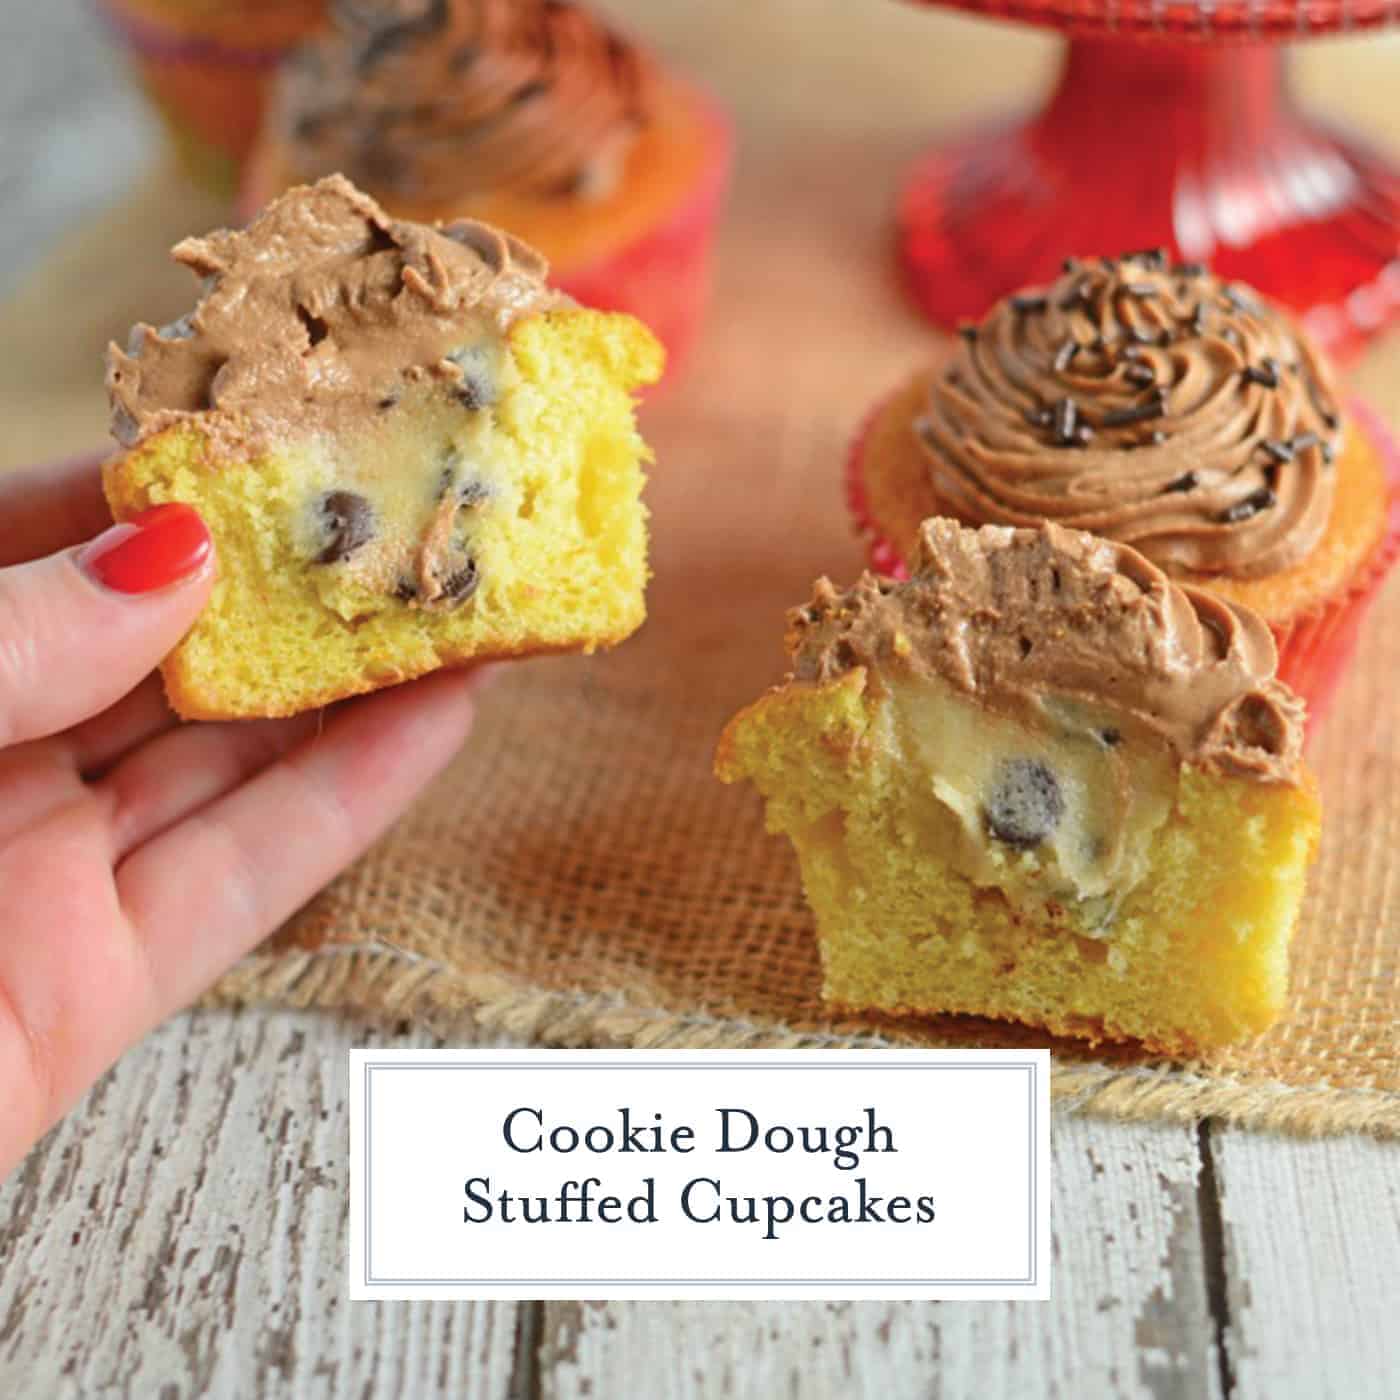 Cookie Dough Stuffed Cupcakes are vanilla cupcakes stuffed with edible cookie dough and topped with whipped chocolate frosting. You won't beleive how easy these are to make! #stuffedcupcakes #cookiedoughstuffedcupcakes www.savoryexperiments.com